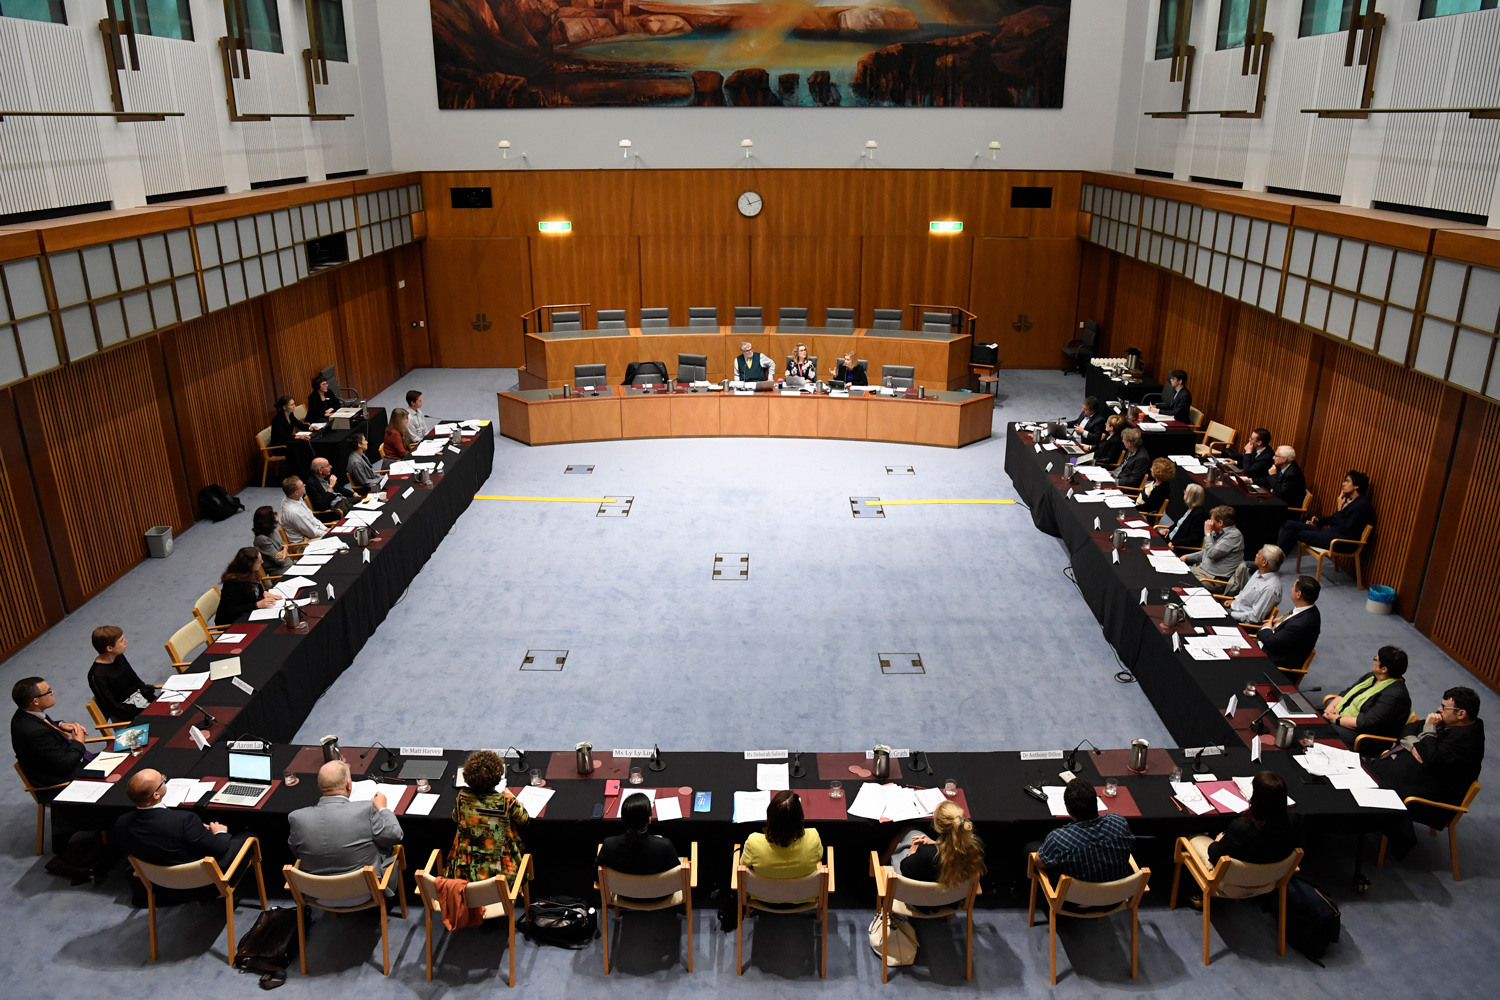 Legal and Constitutional Affairs References Committee roundtable for its inquiry into nationhood, national identity and democracy, 14 February 2020.